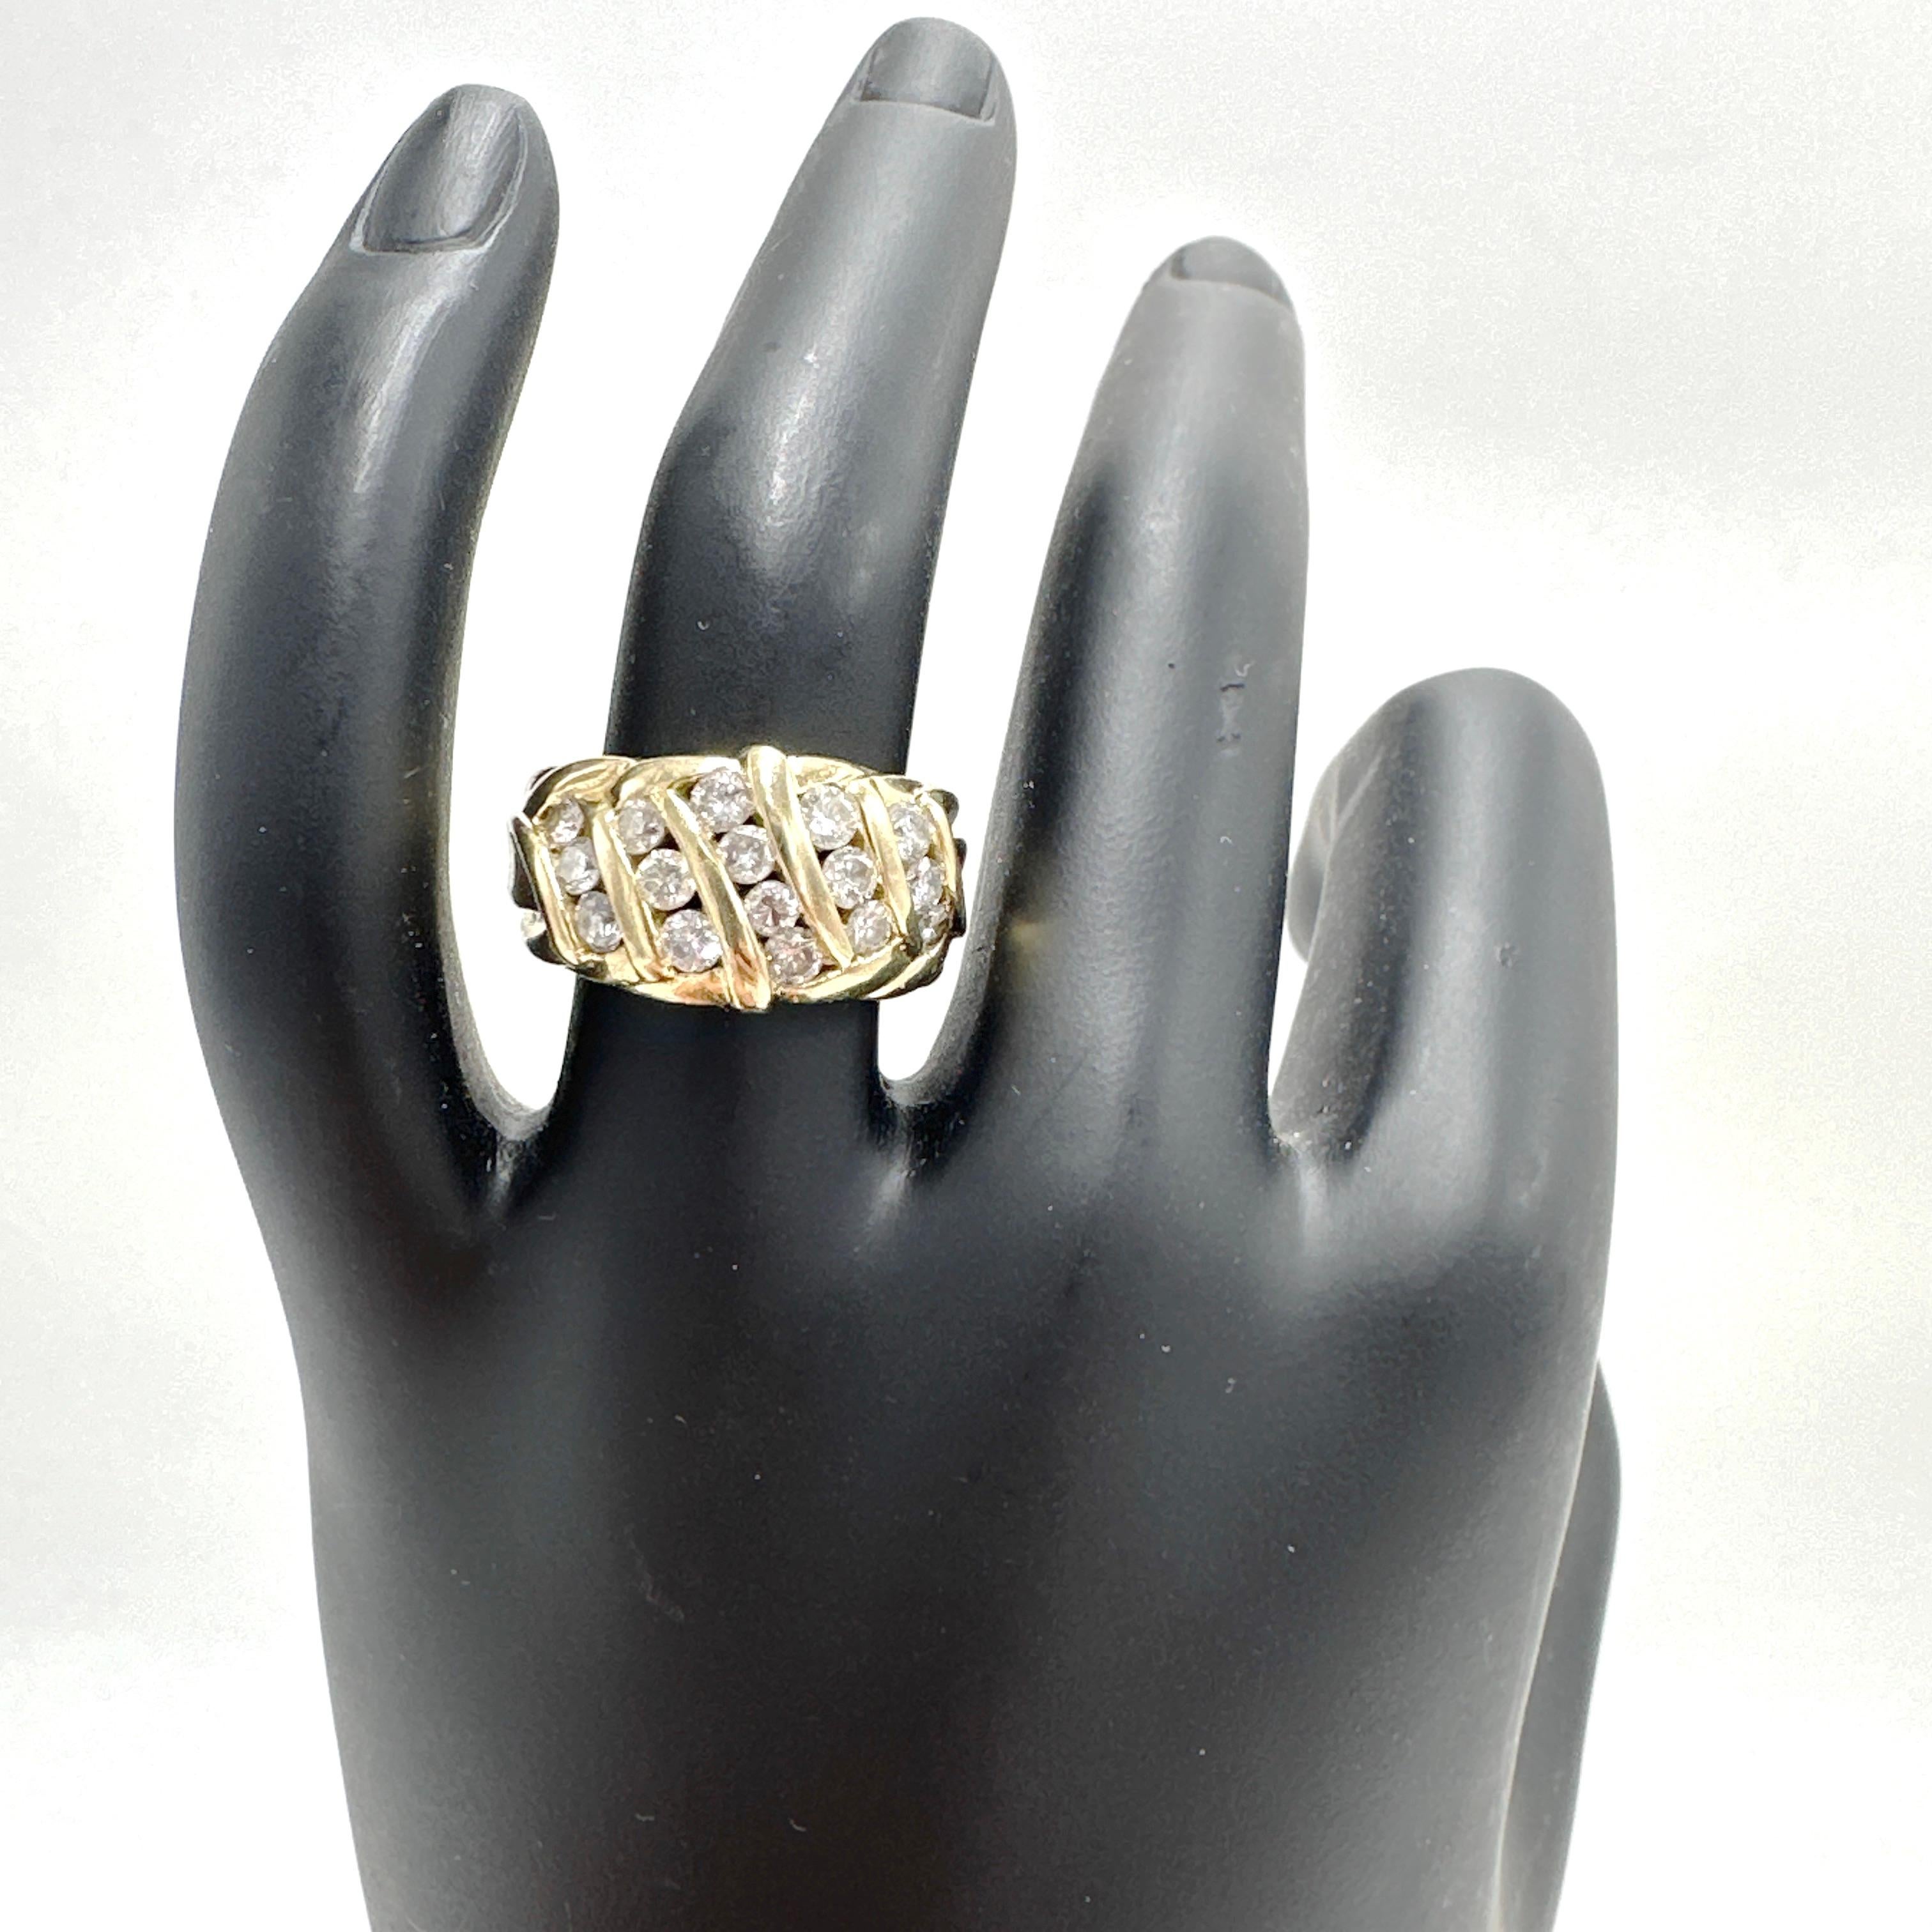 Here is a beautiful 14k Yellow Gold Natural Diamond Ring 0.98TCW. 

This ring features 16 x 0.05ct to 0.08ct natural round brilliant diamonds each measuring approx. 2.40mm x 2.80mm with a total estimated weight of 0.98TCW. Diamonds are I-1 clarity,